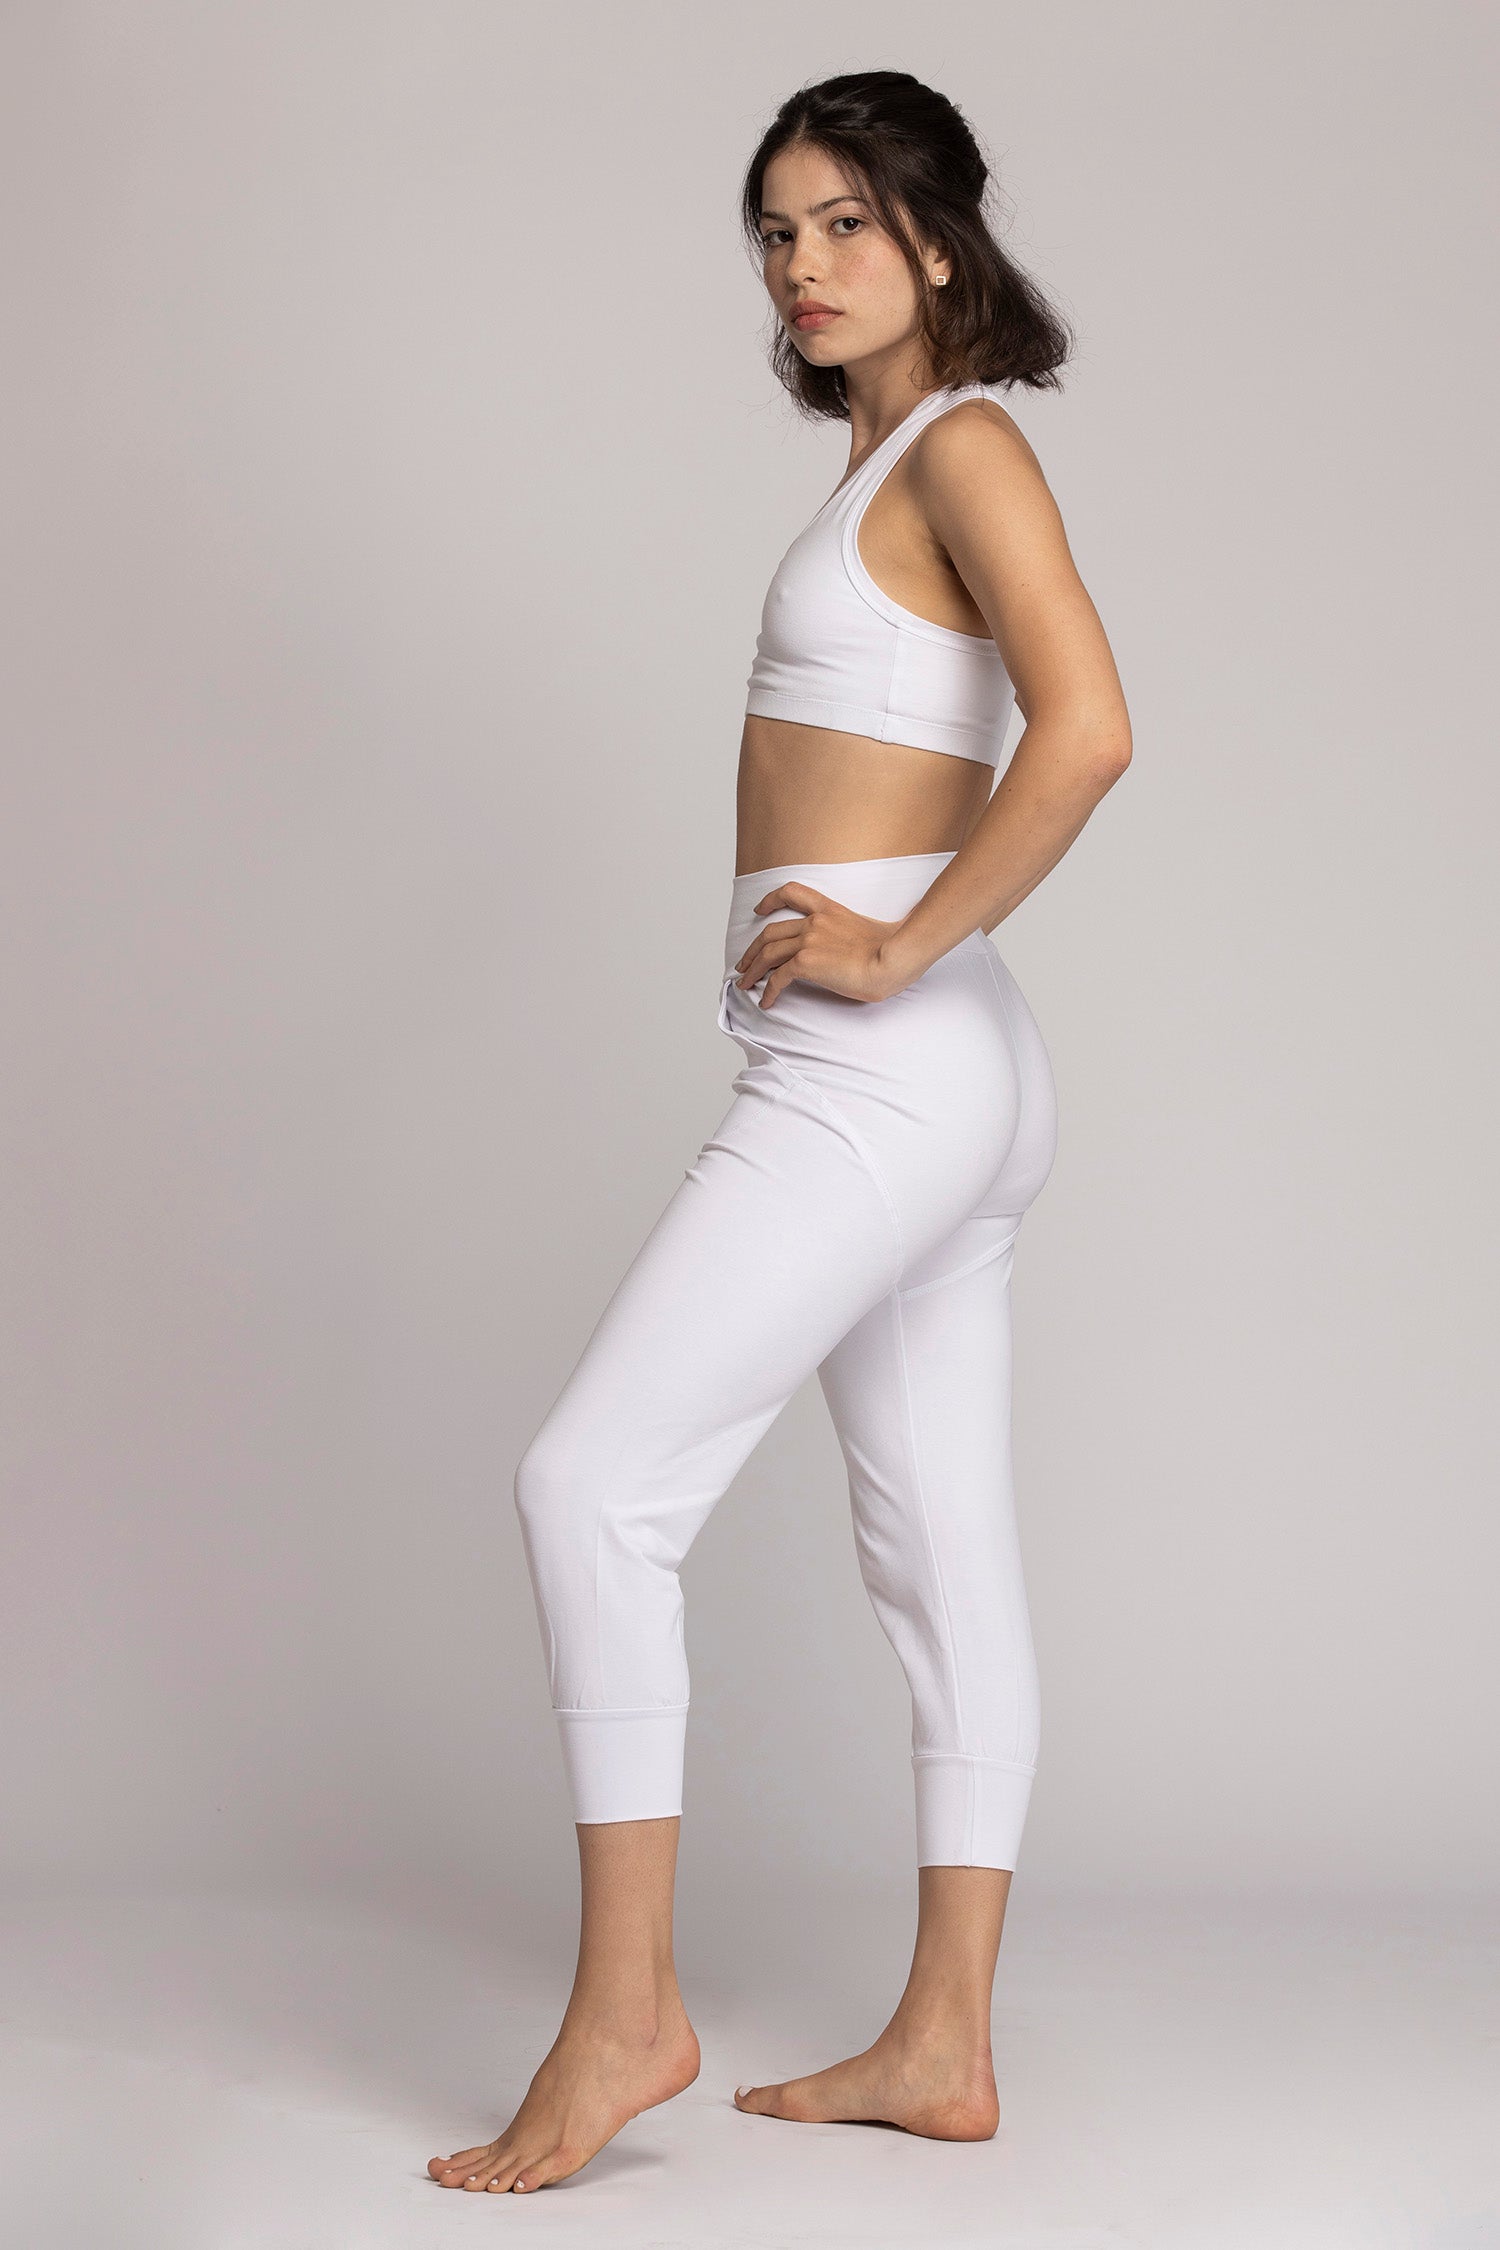 White Yoga Capris for Women for High-Quality - Durable Sportswear